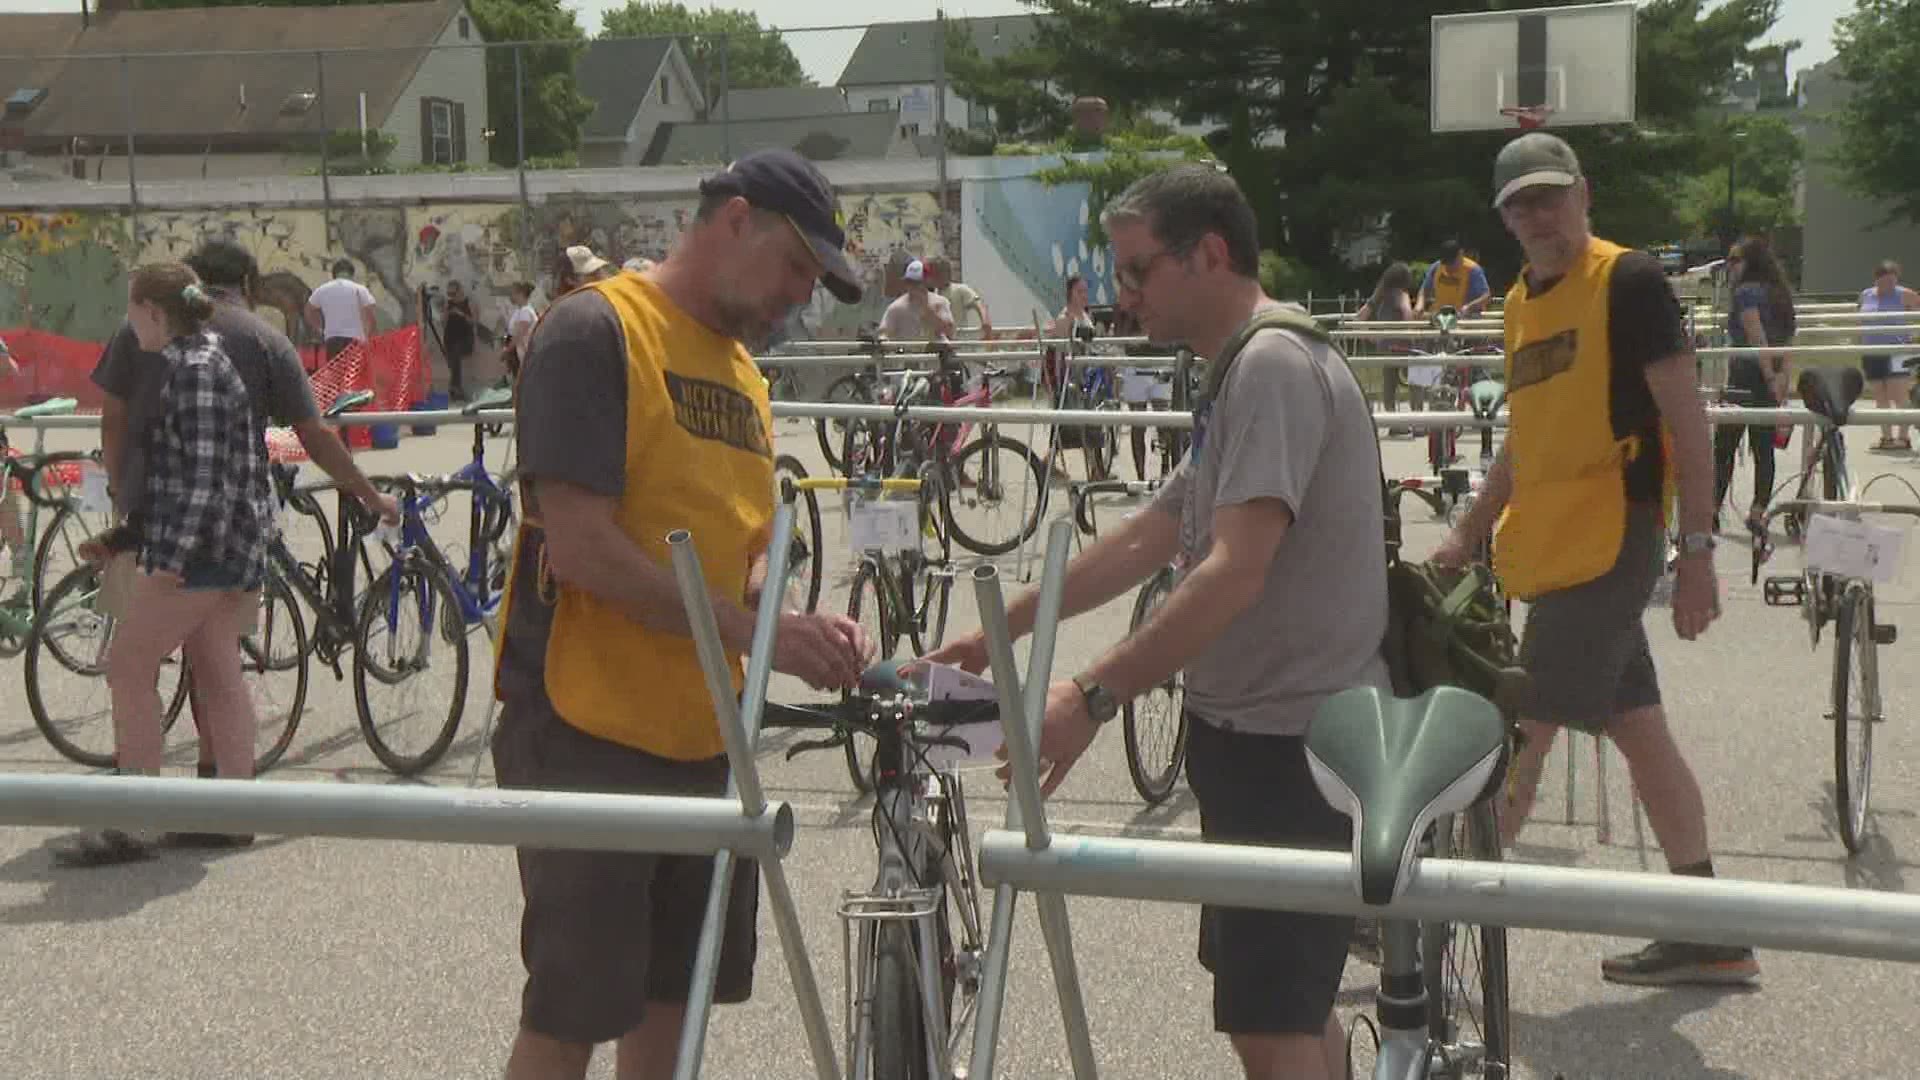 Used bikes for sale at Bicycle Coalition of Maines annual bike swap newscentermaine